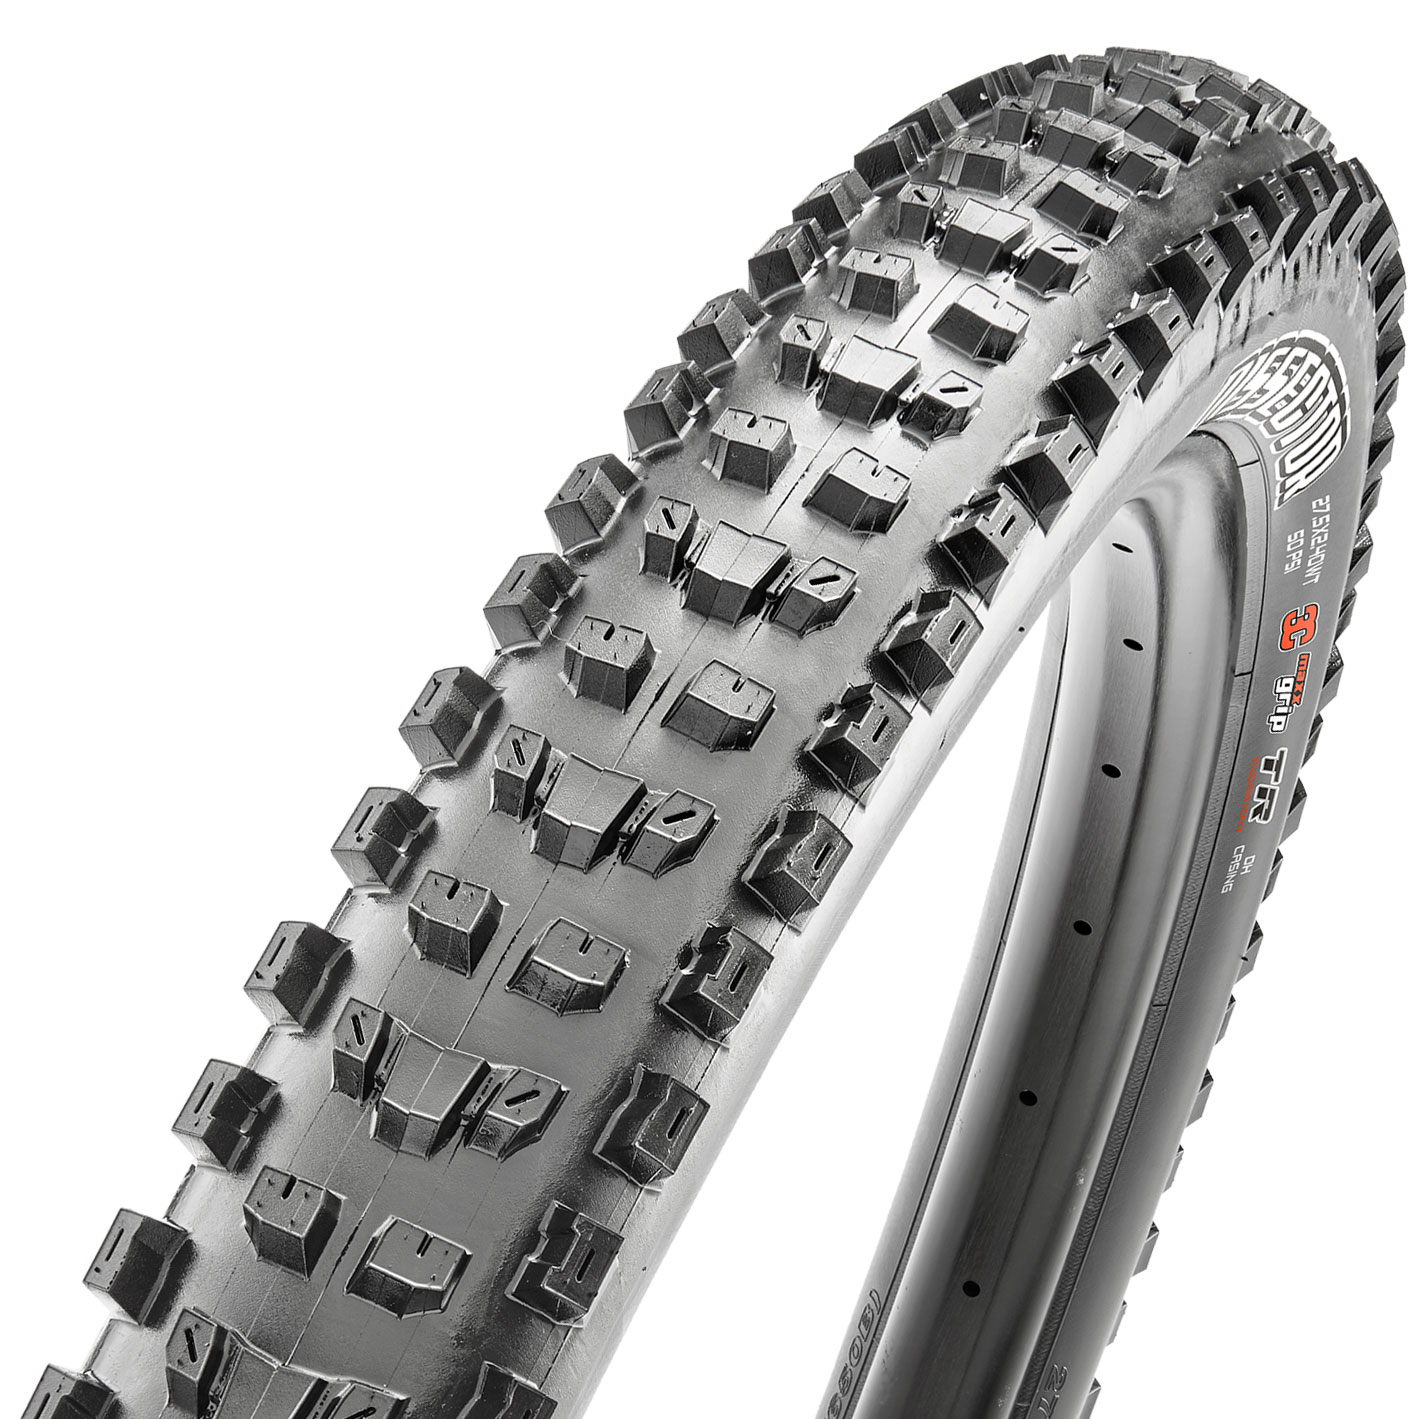 Maxxis Dissector 29x2.40WT 3C MaxxGrip, Tubeless Ready, DH Chasing